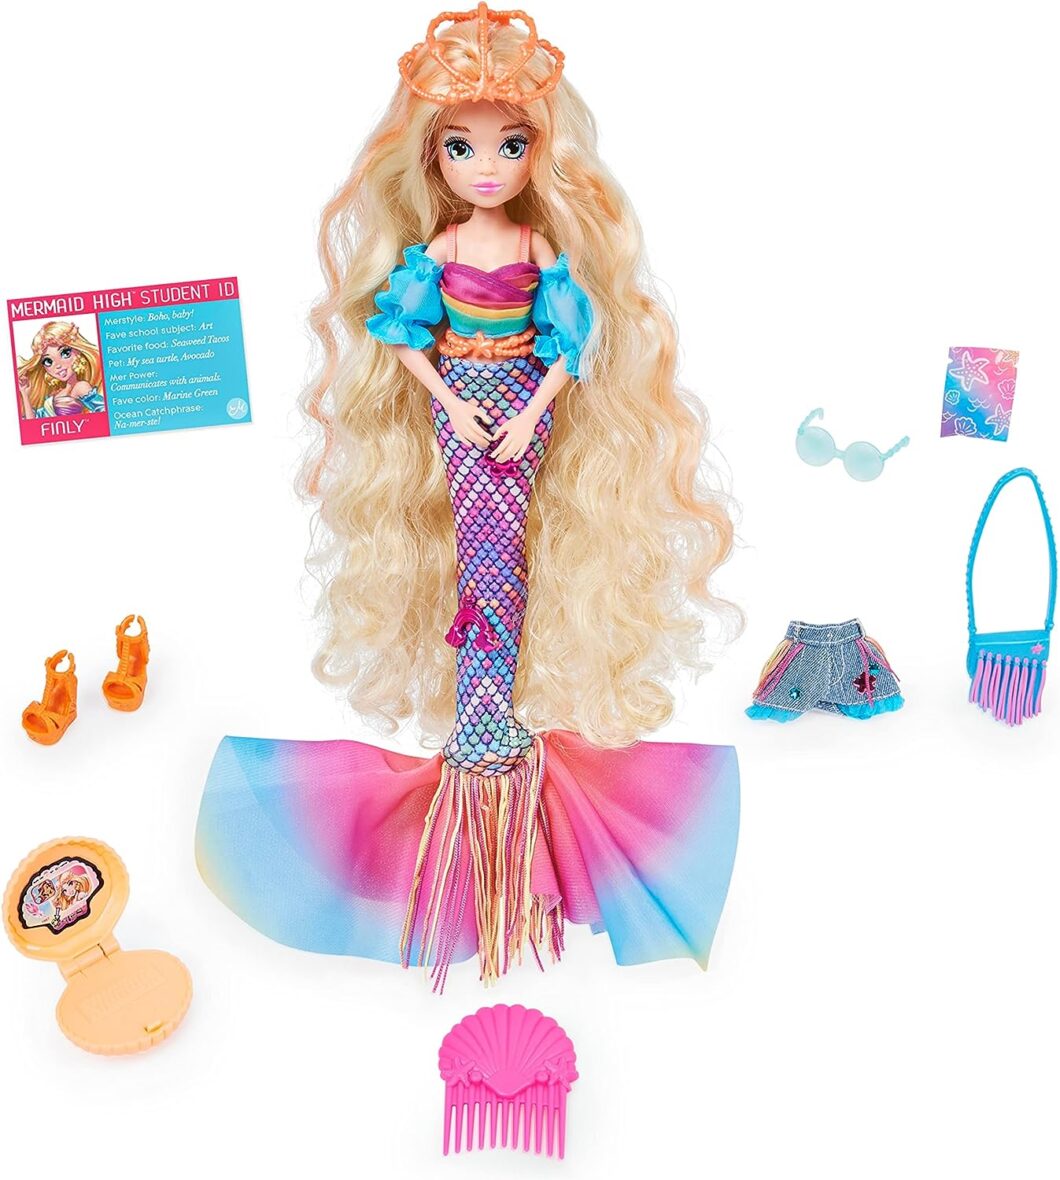 MERMAID HIGH, Finly Deluxe Mermaid Doll & Accessories with Removable Tail, Doll Clothes and Fashion Accessories, Kids Toys for Girls